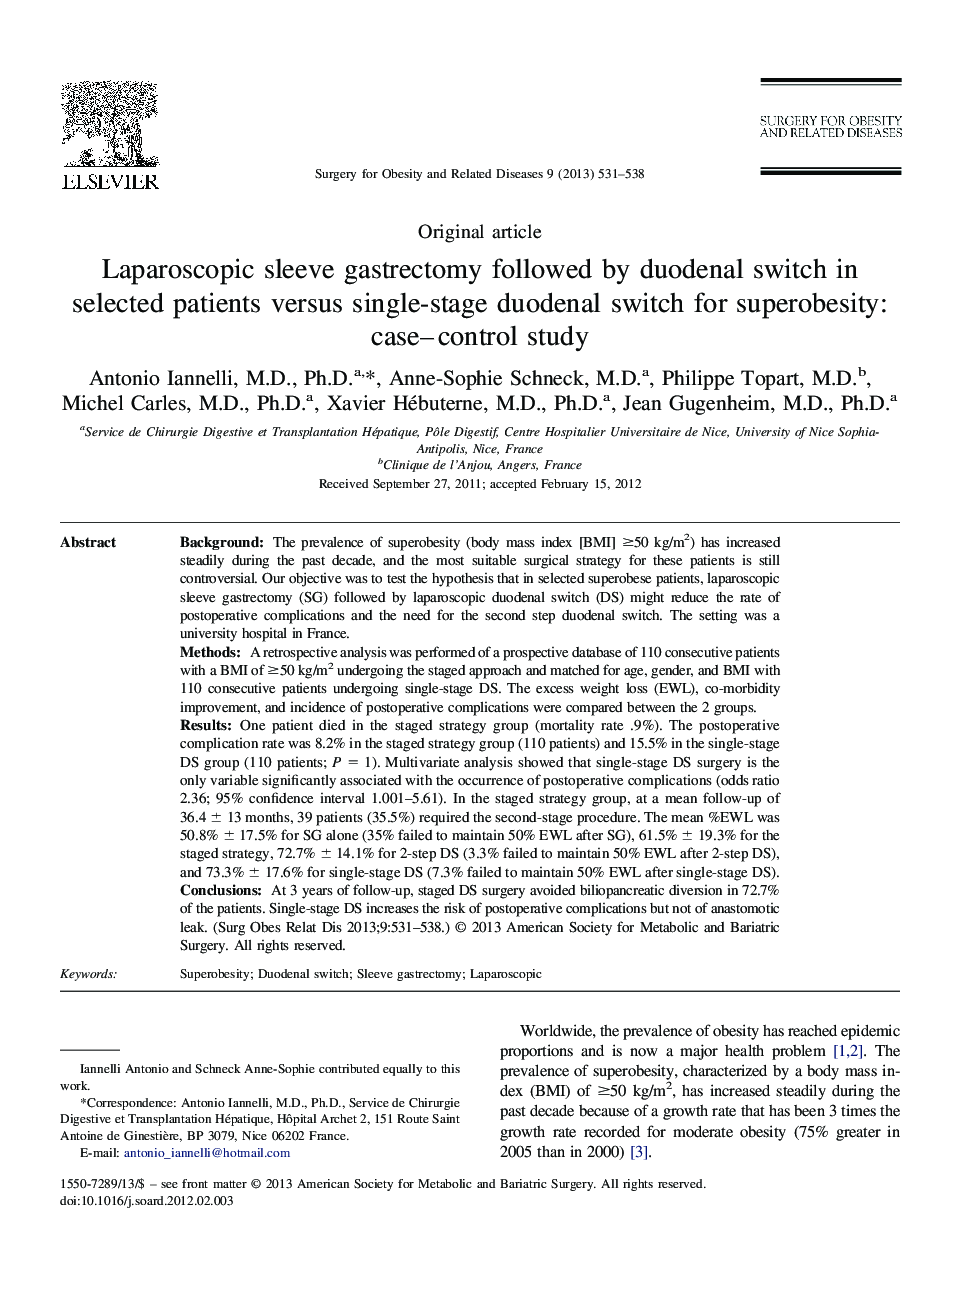 Laparoscopic sleeve gastrectomy followed by duodenal switch in selected patients versus single-stage duodenal switch for superobesity: case-control study